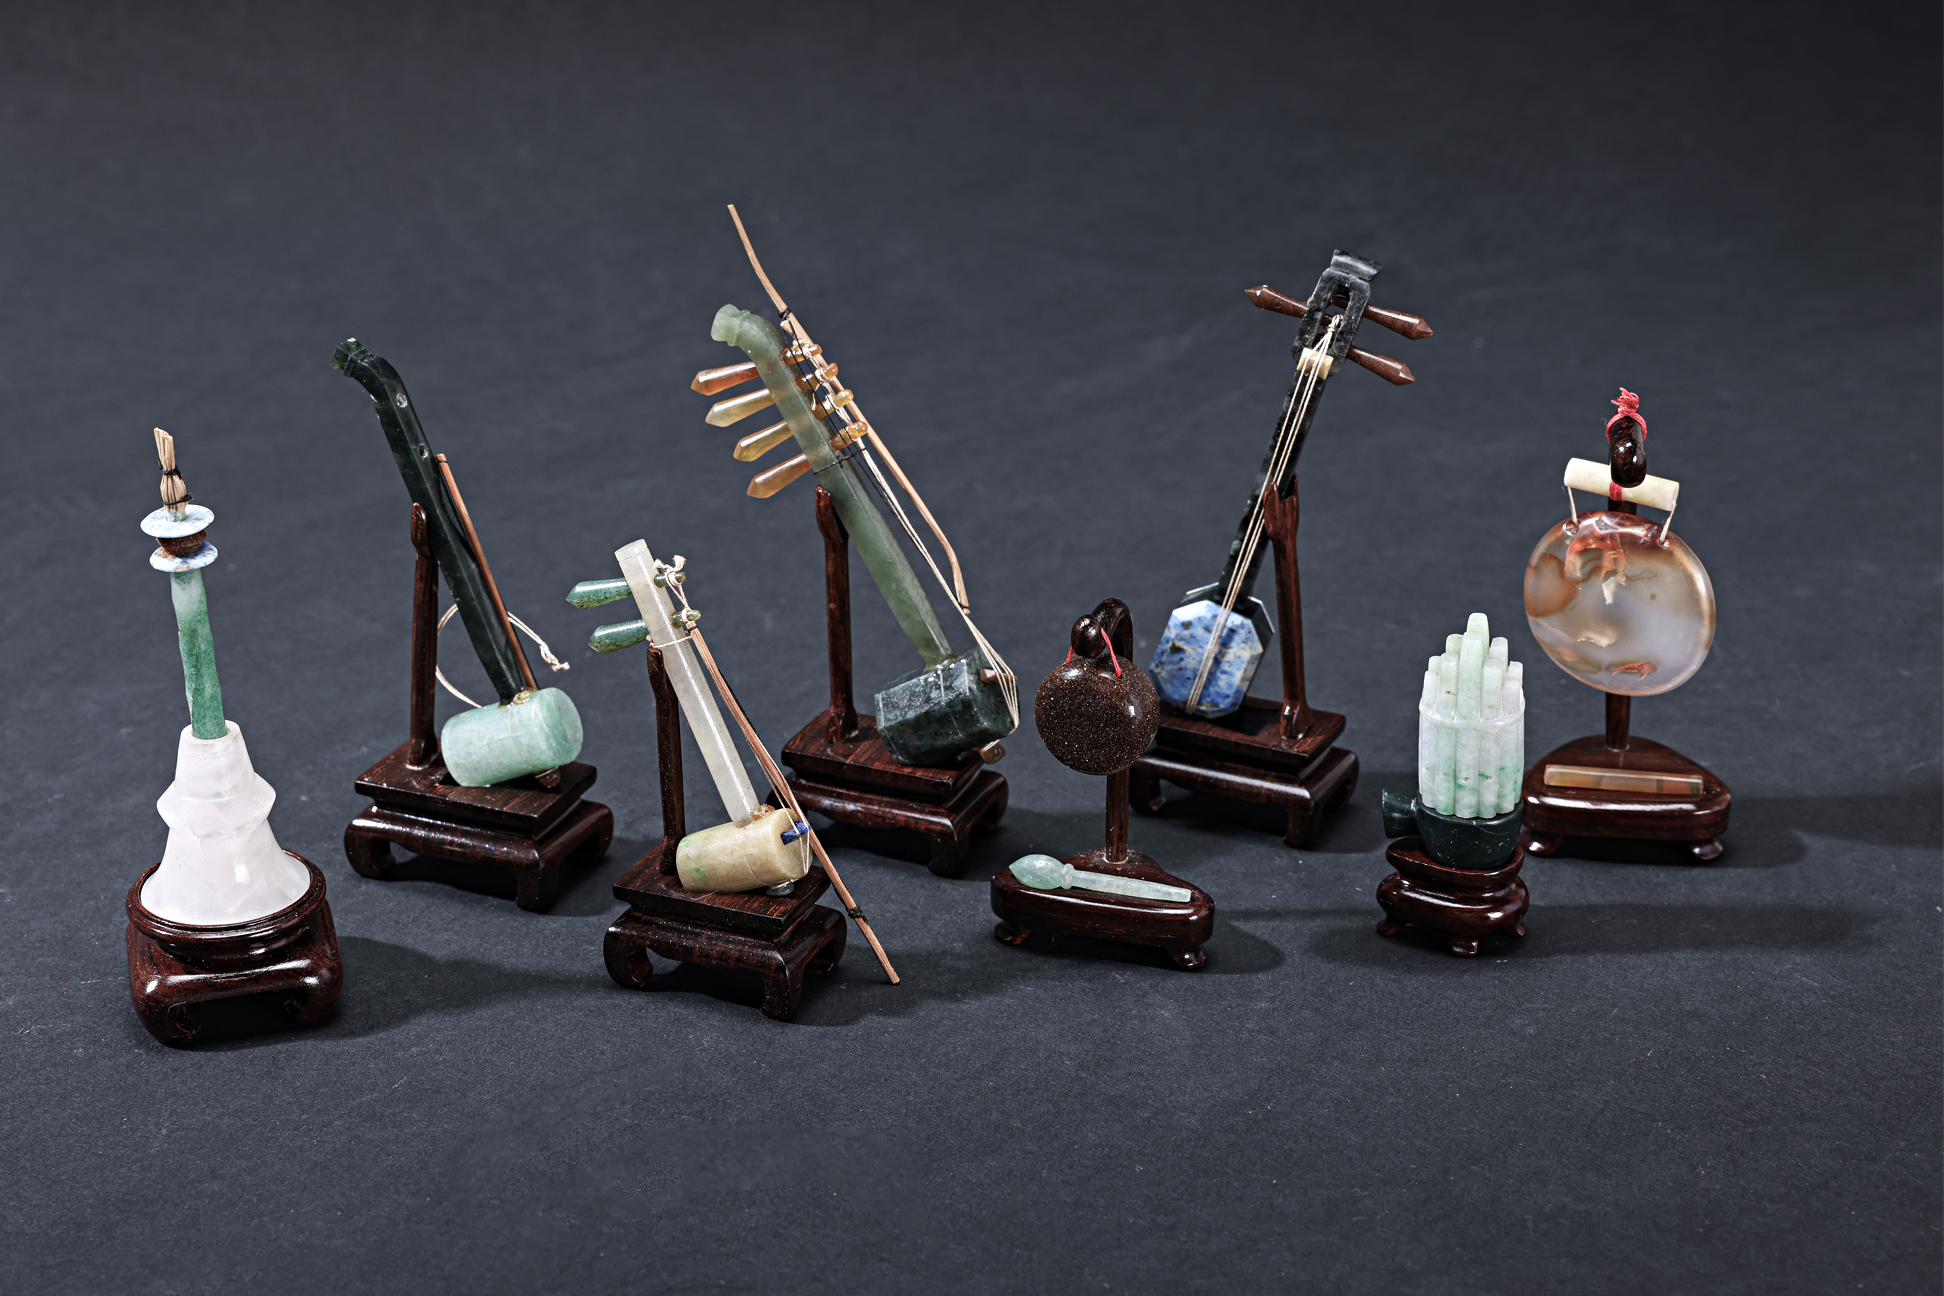 A GROUP OF MINIATURE HARDSTONE CHINESE MUSICAL INSTRUMENTS - Image 2 of 4